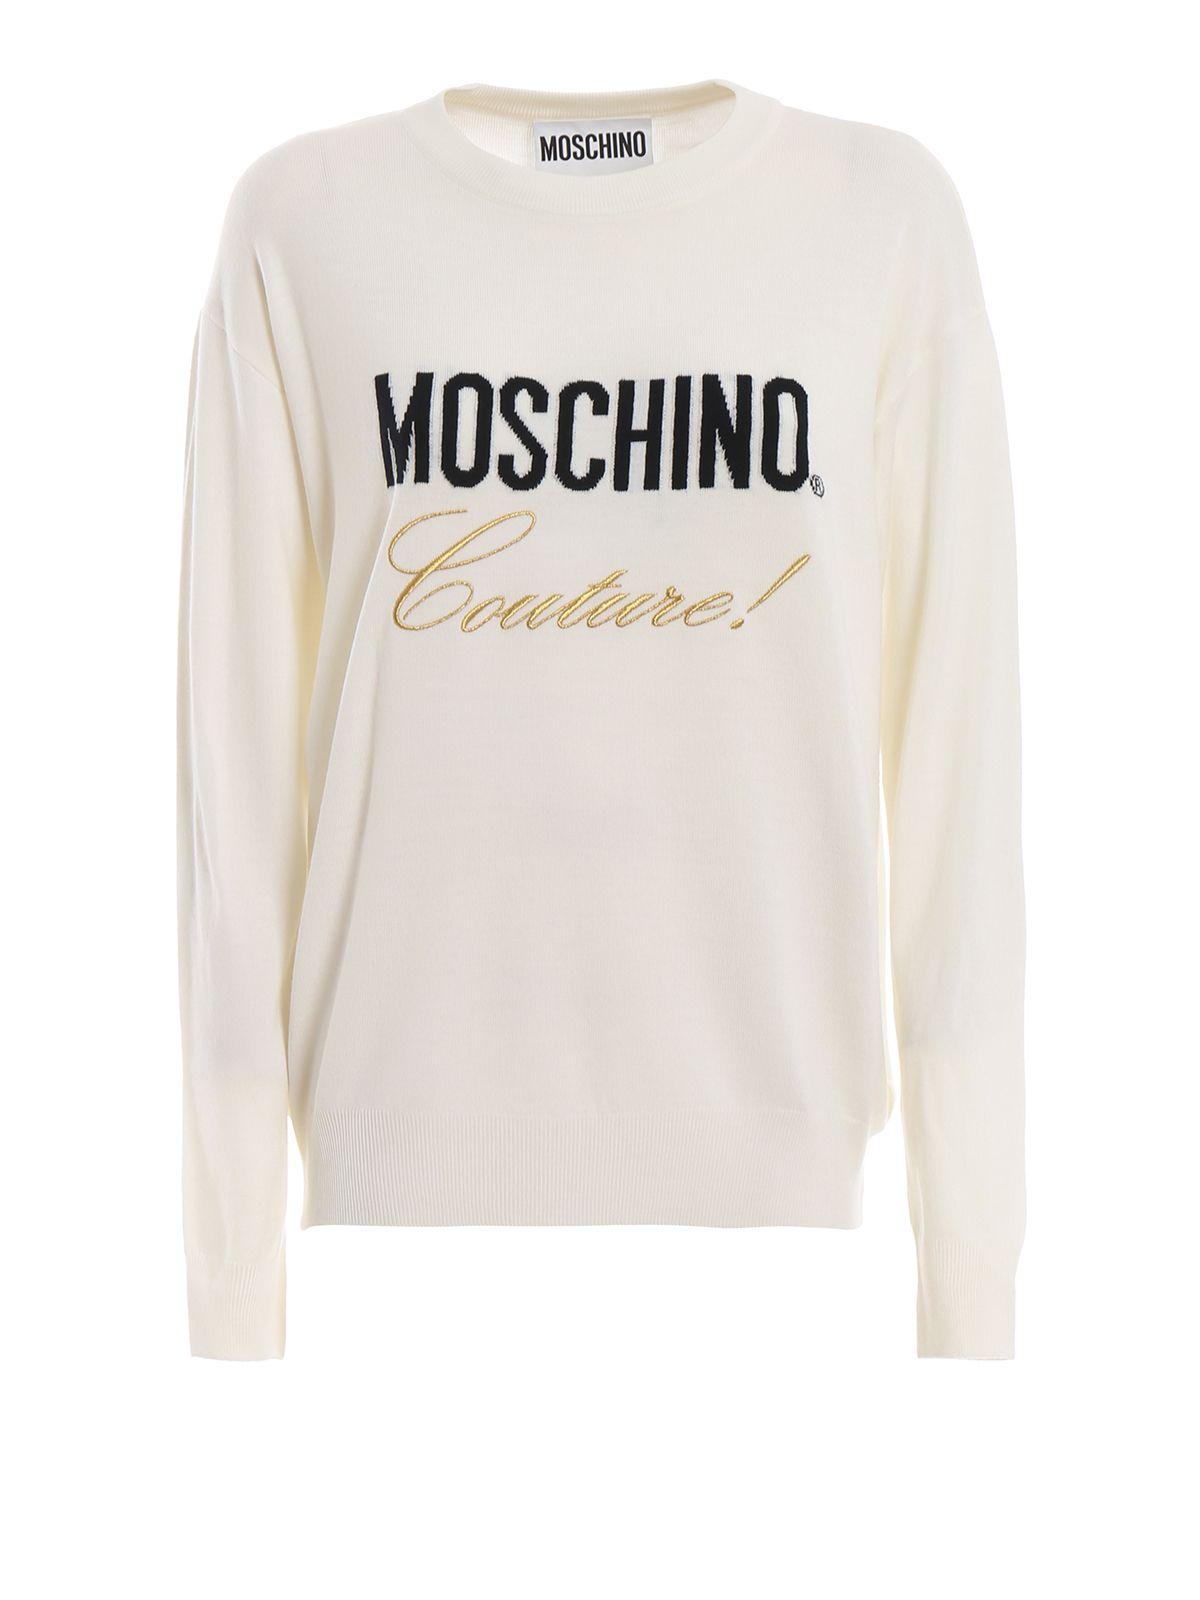 Moschino White Wool Sweater in White - Save 19% - Lyst